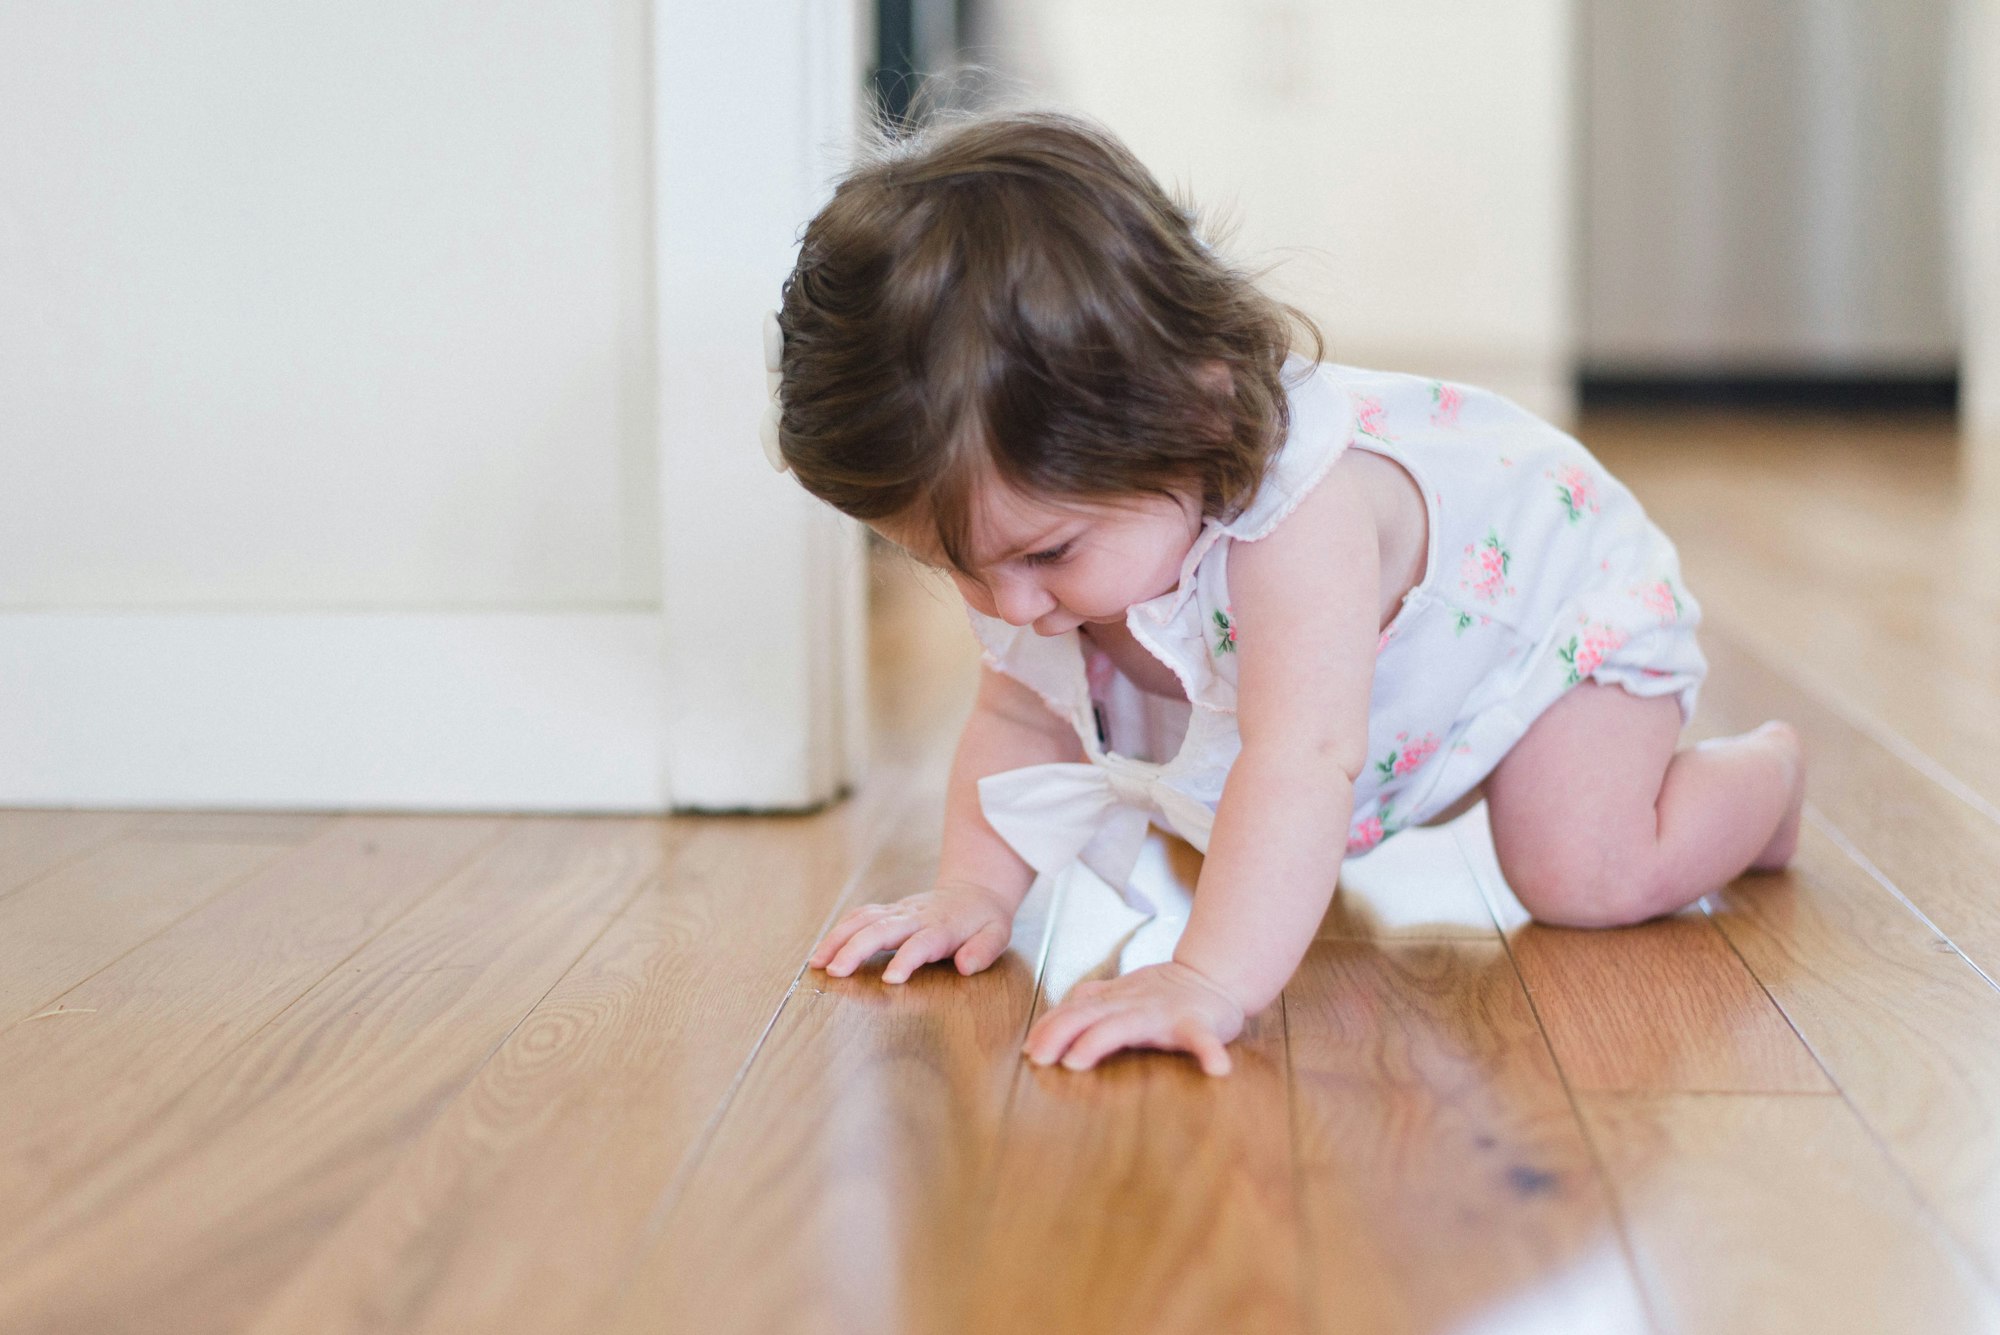 A baby crawling out of a room.